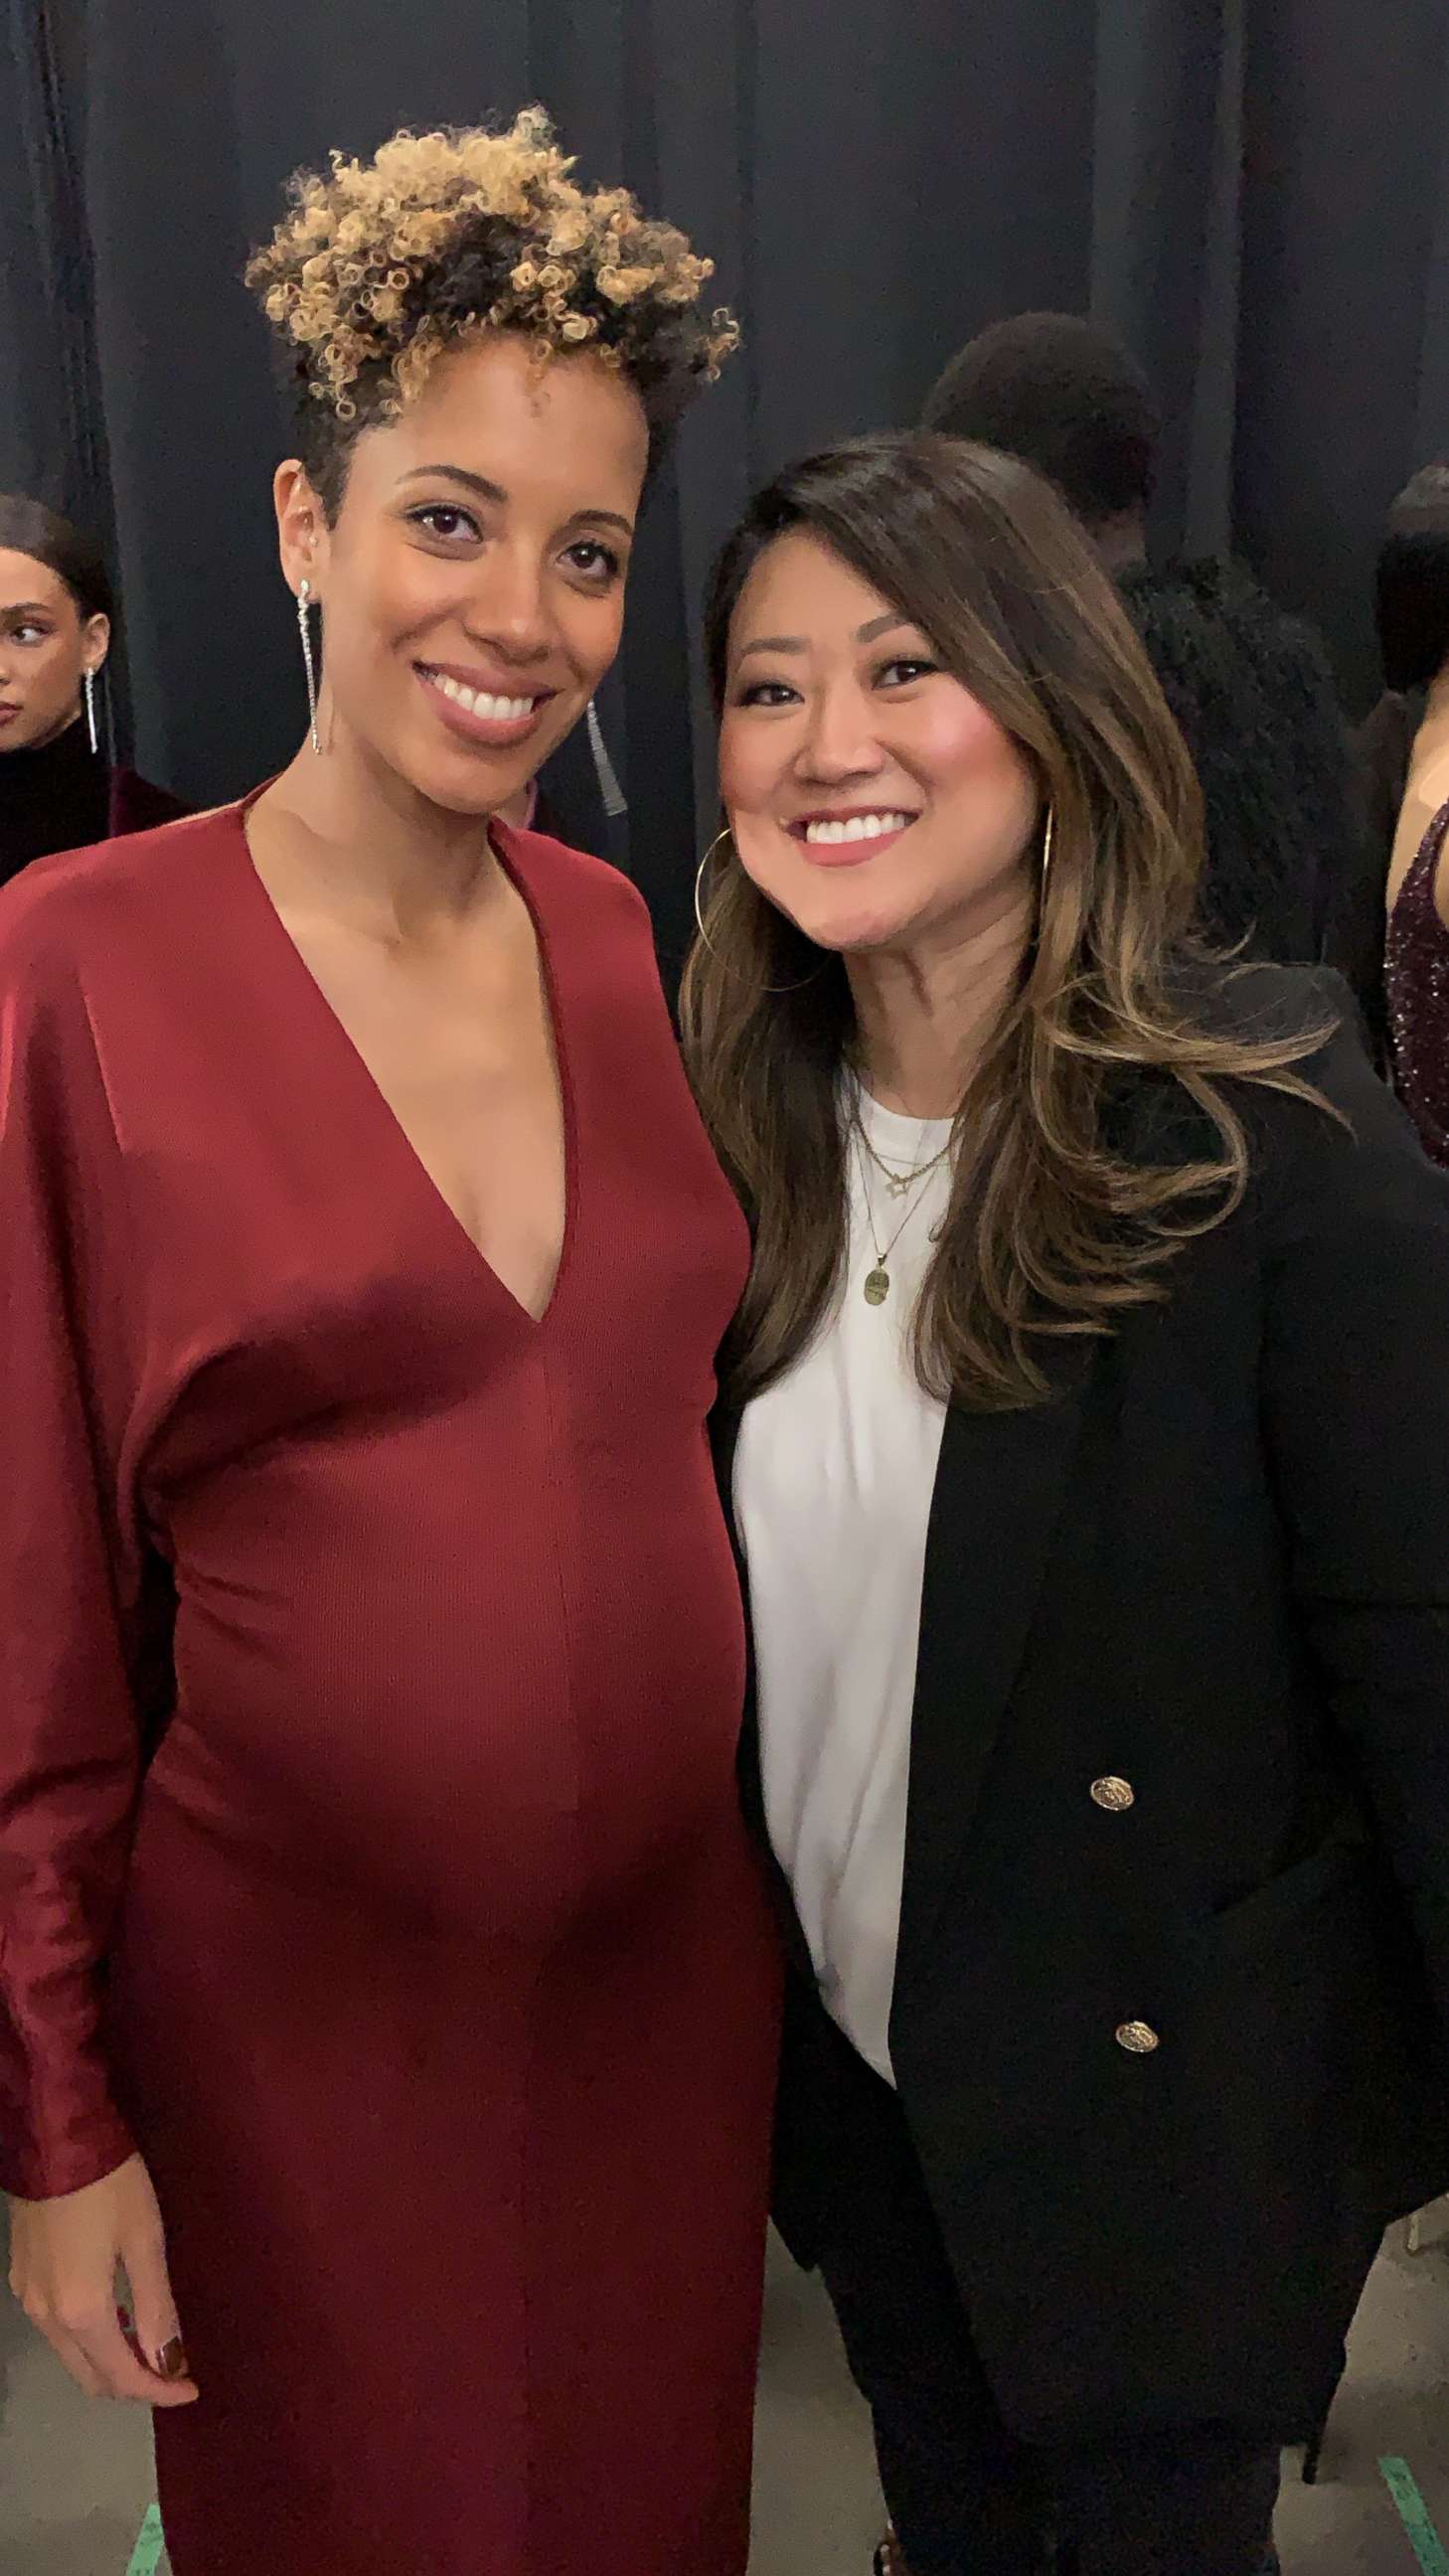 PHOTO: Grace Lee posing with designer Carly Cushnie after the fall 2019 Cushnie show.